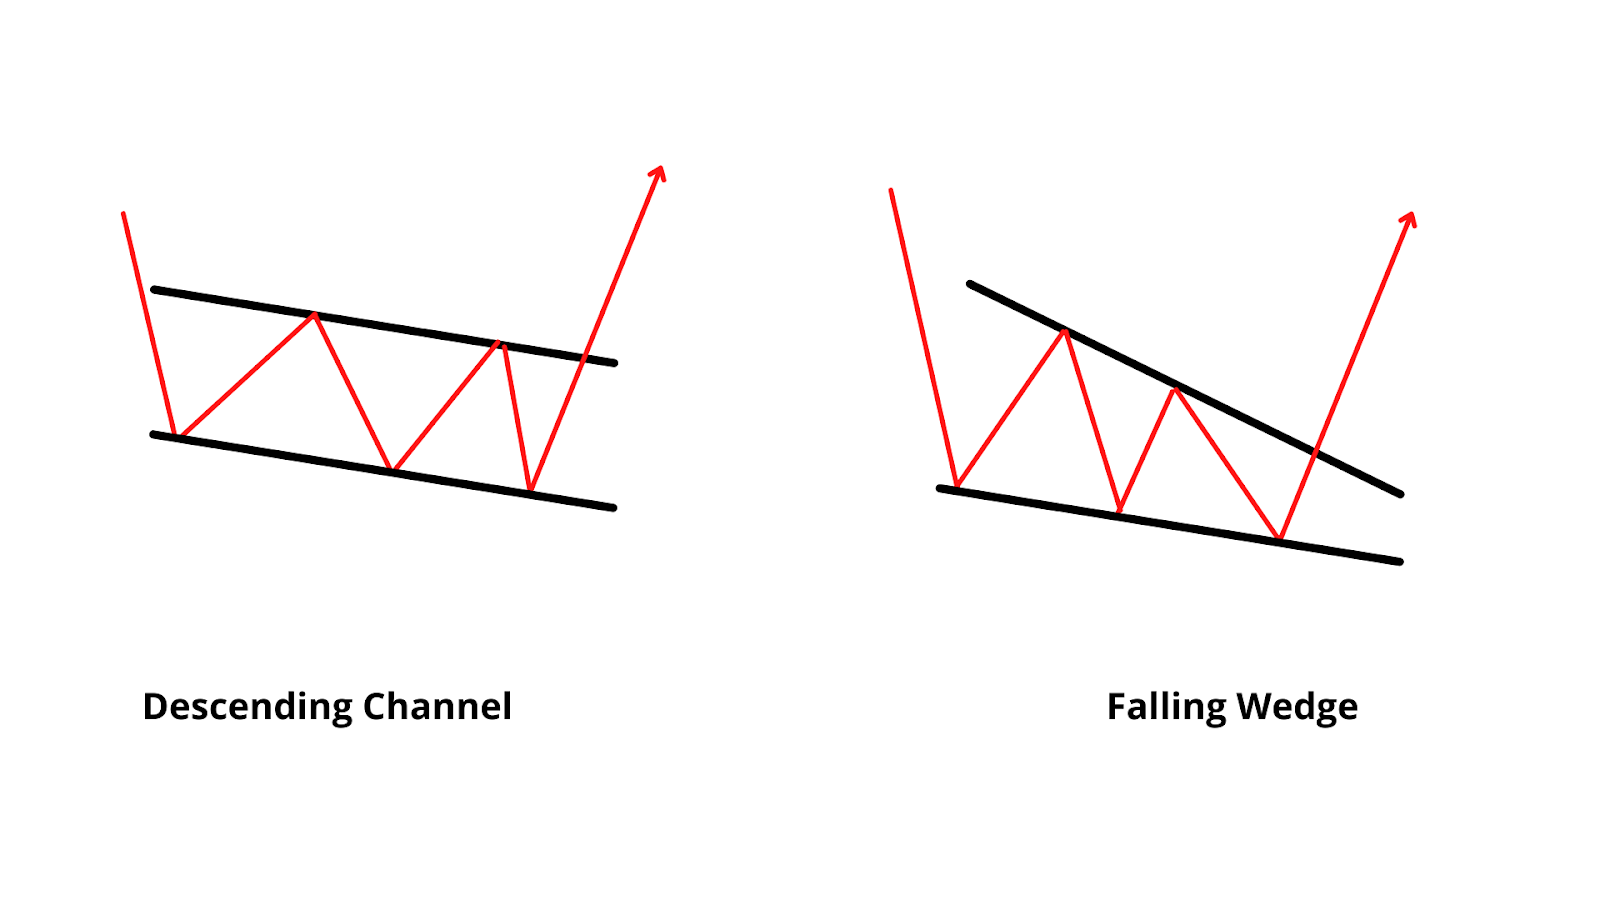 Descending Channel and Falling Wedge